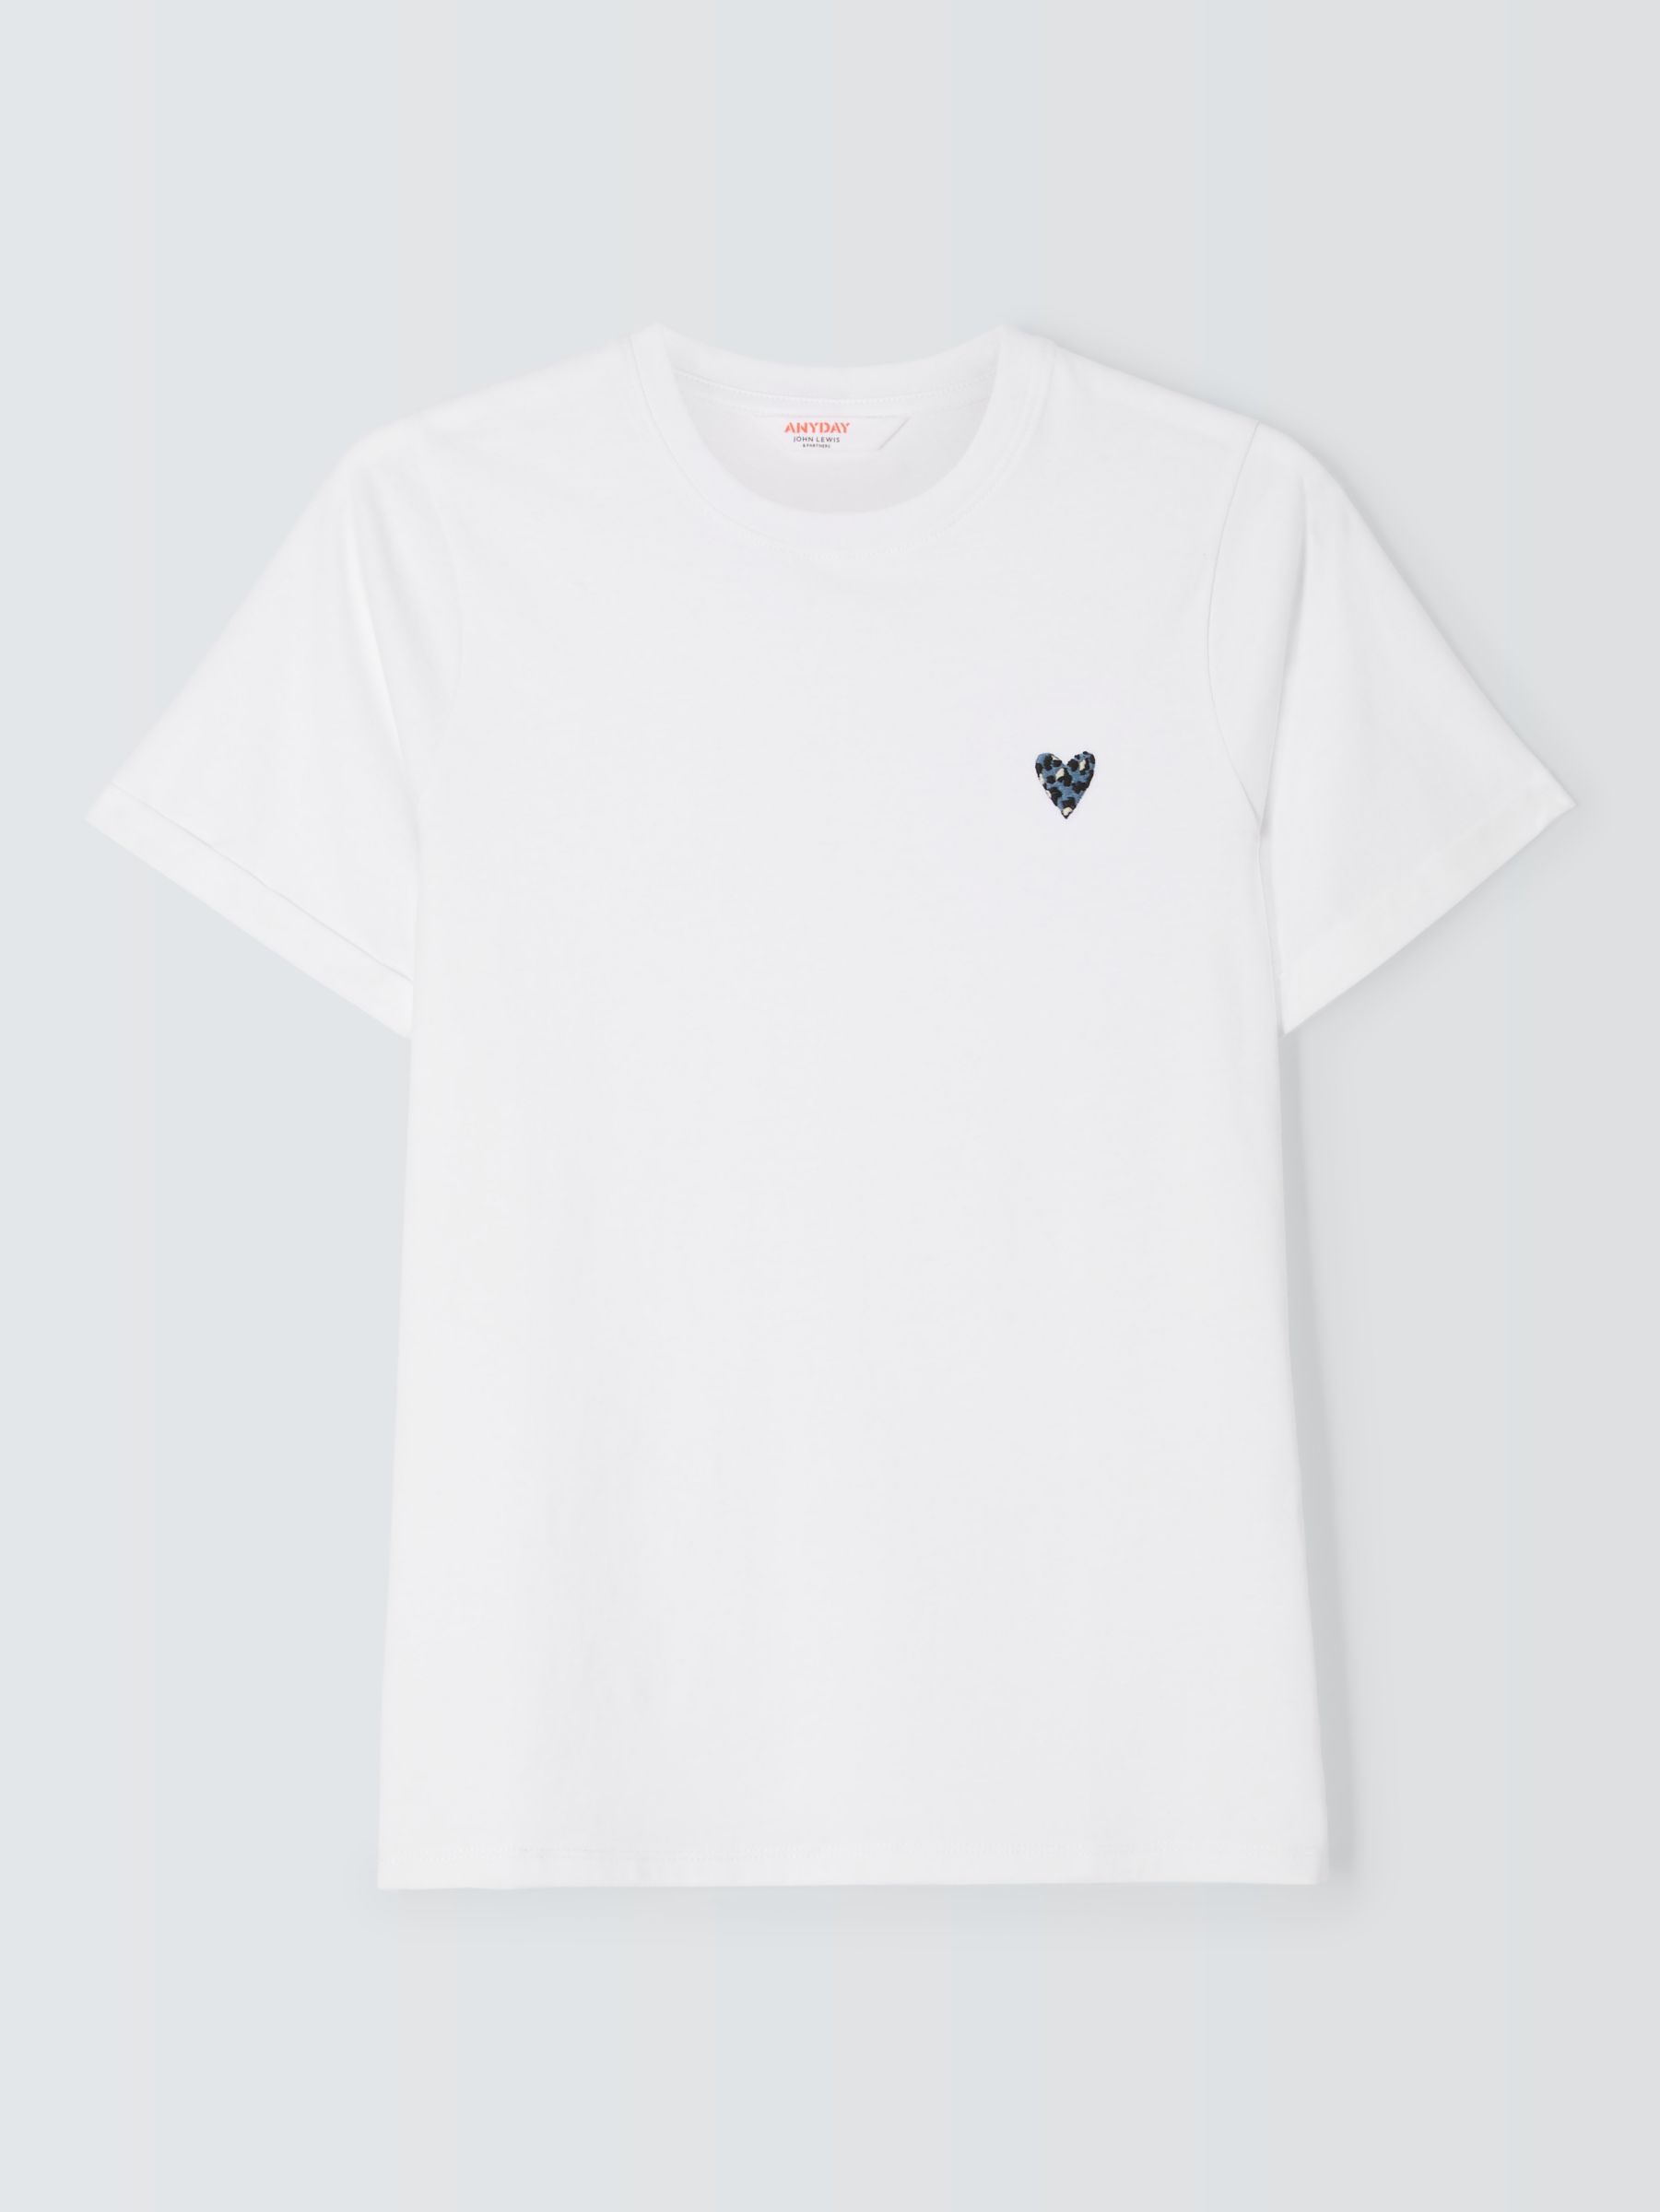 John Lewis ANYDAY Animal Print Embroidered Heart T-Shirt, White, XS